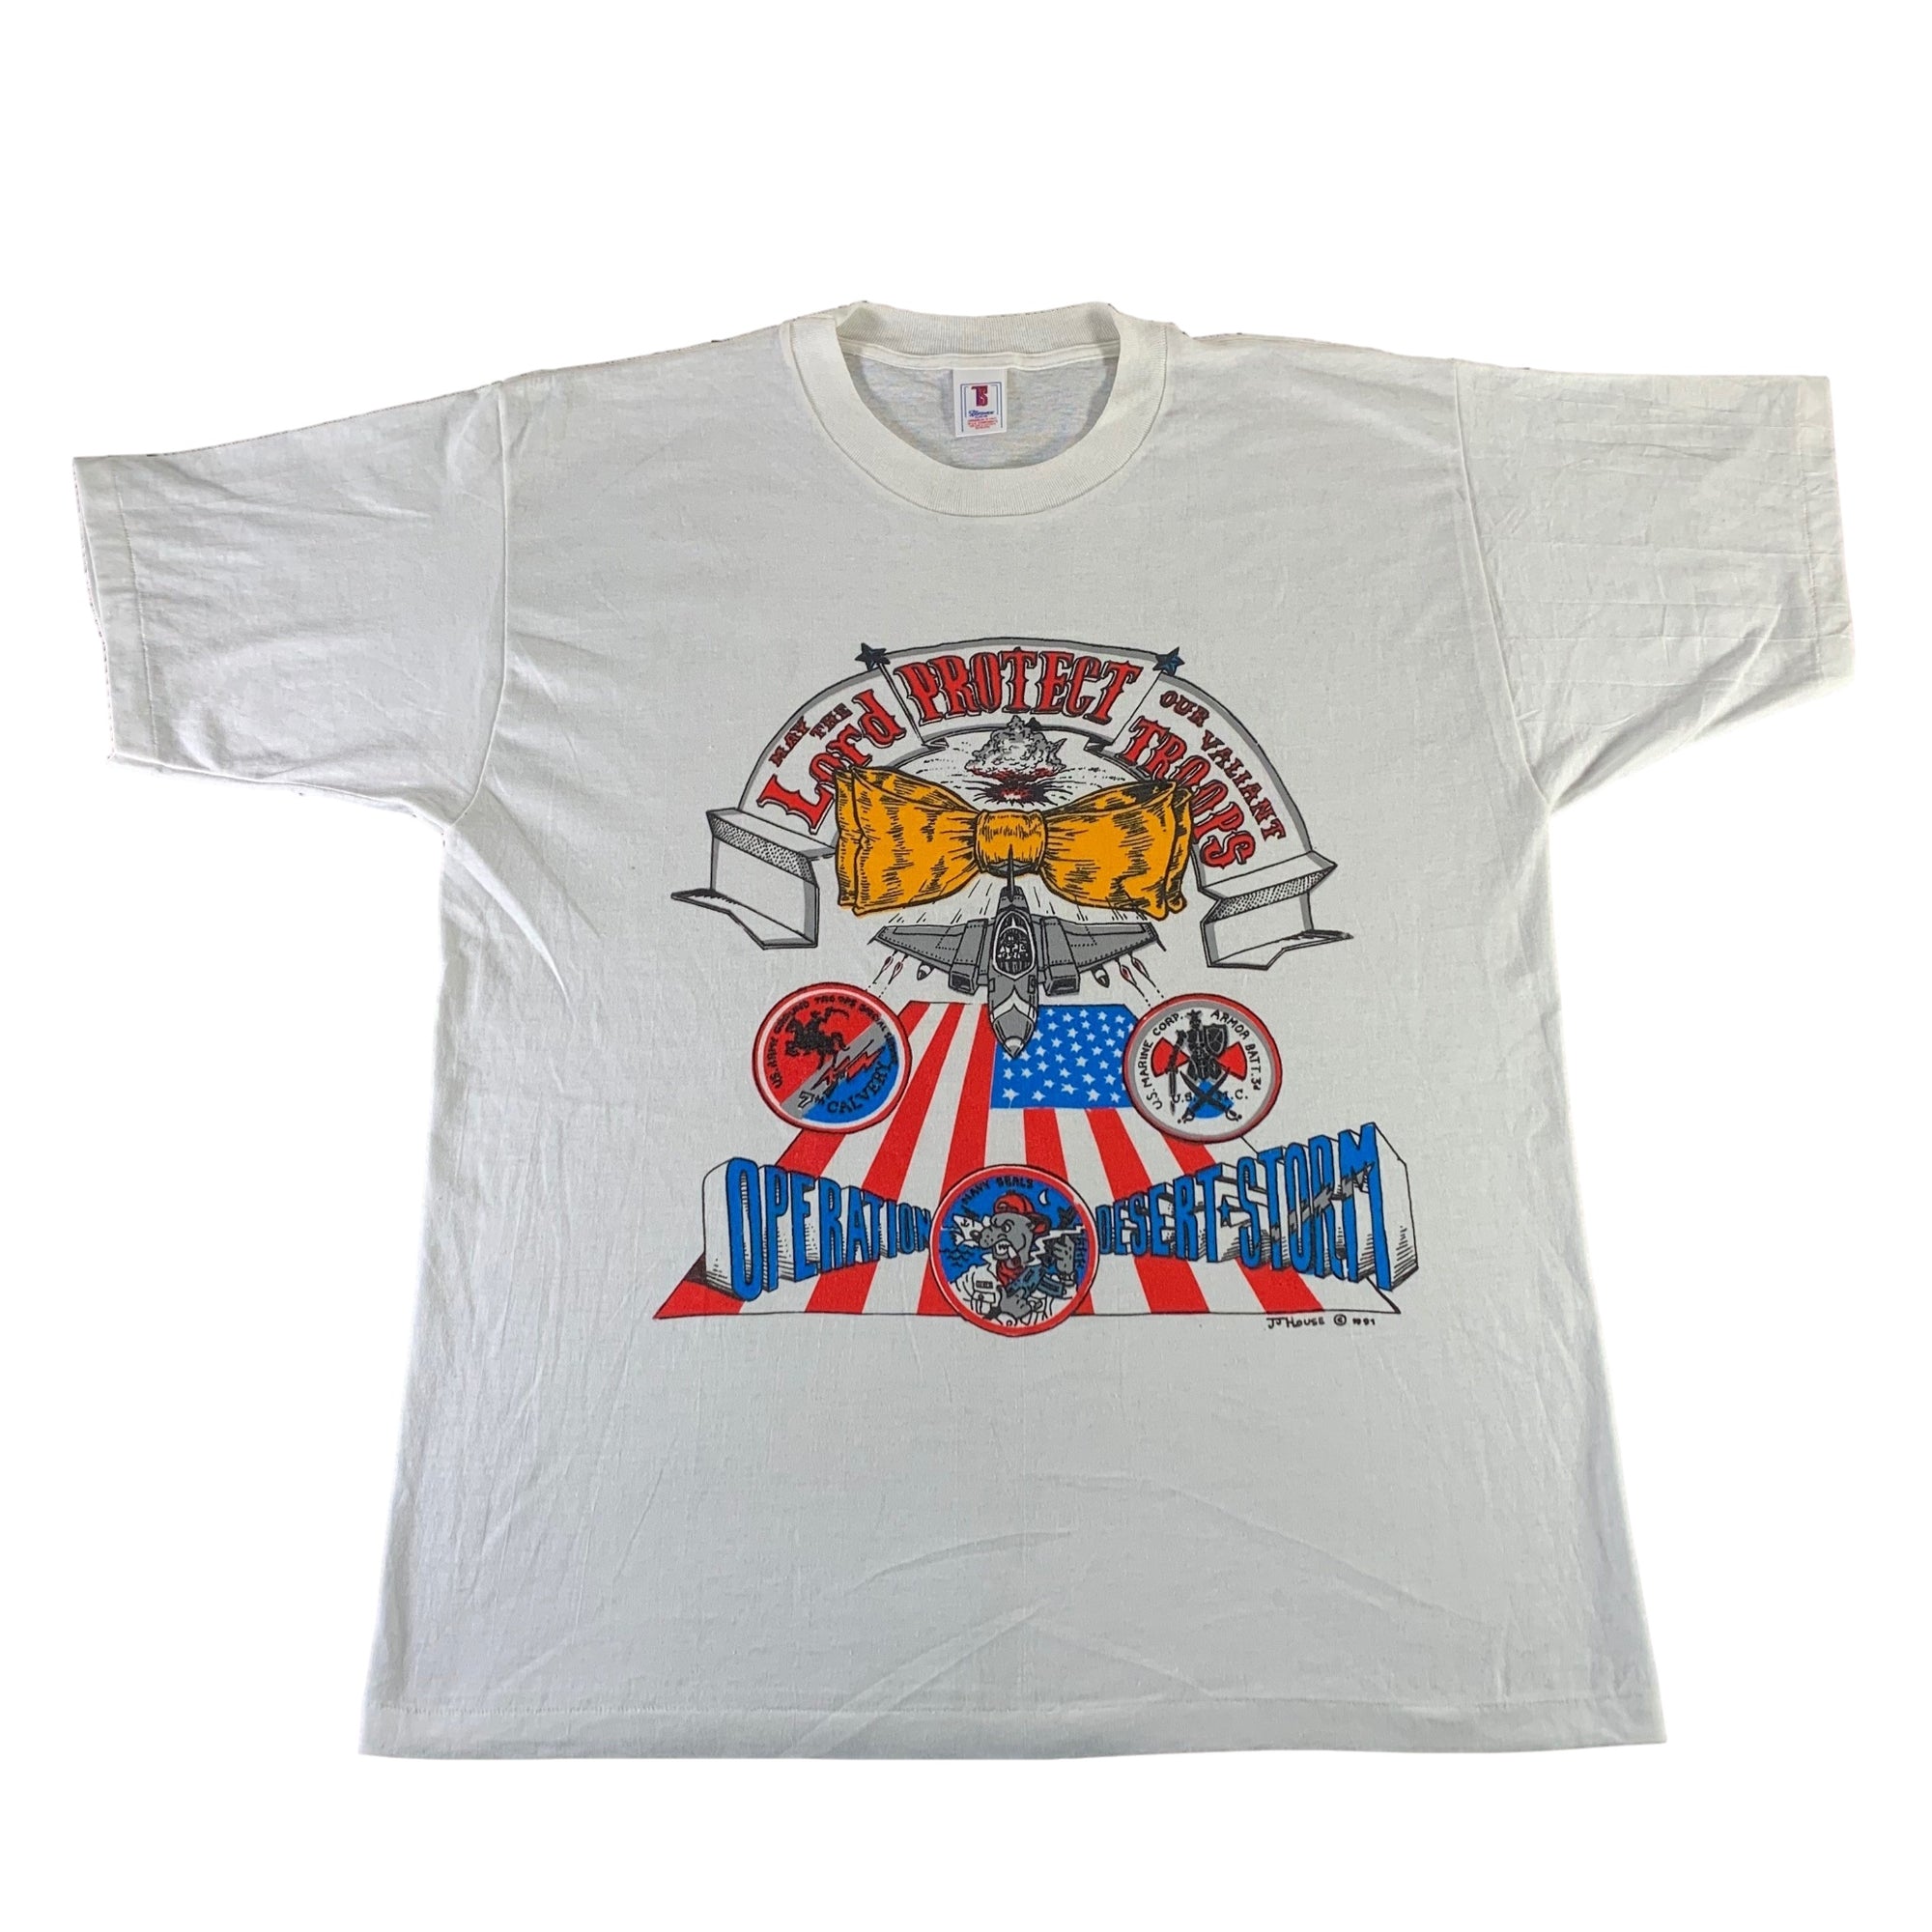 Vintage Protect Our Troops "Desert Storm" T-Shirt - jointcustodydc